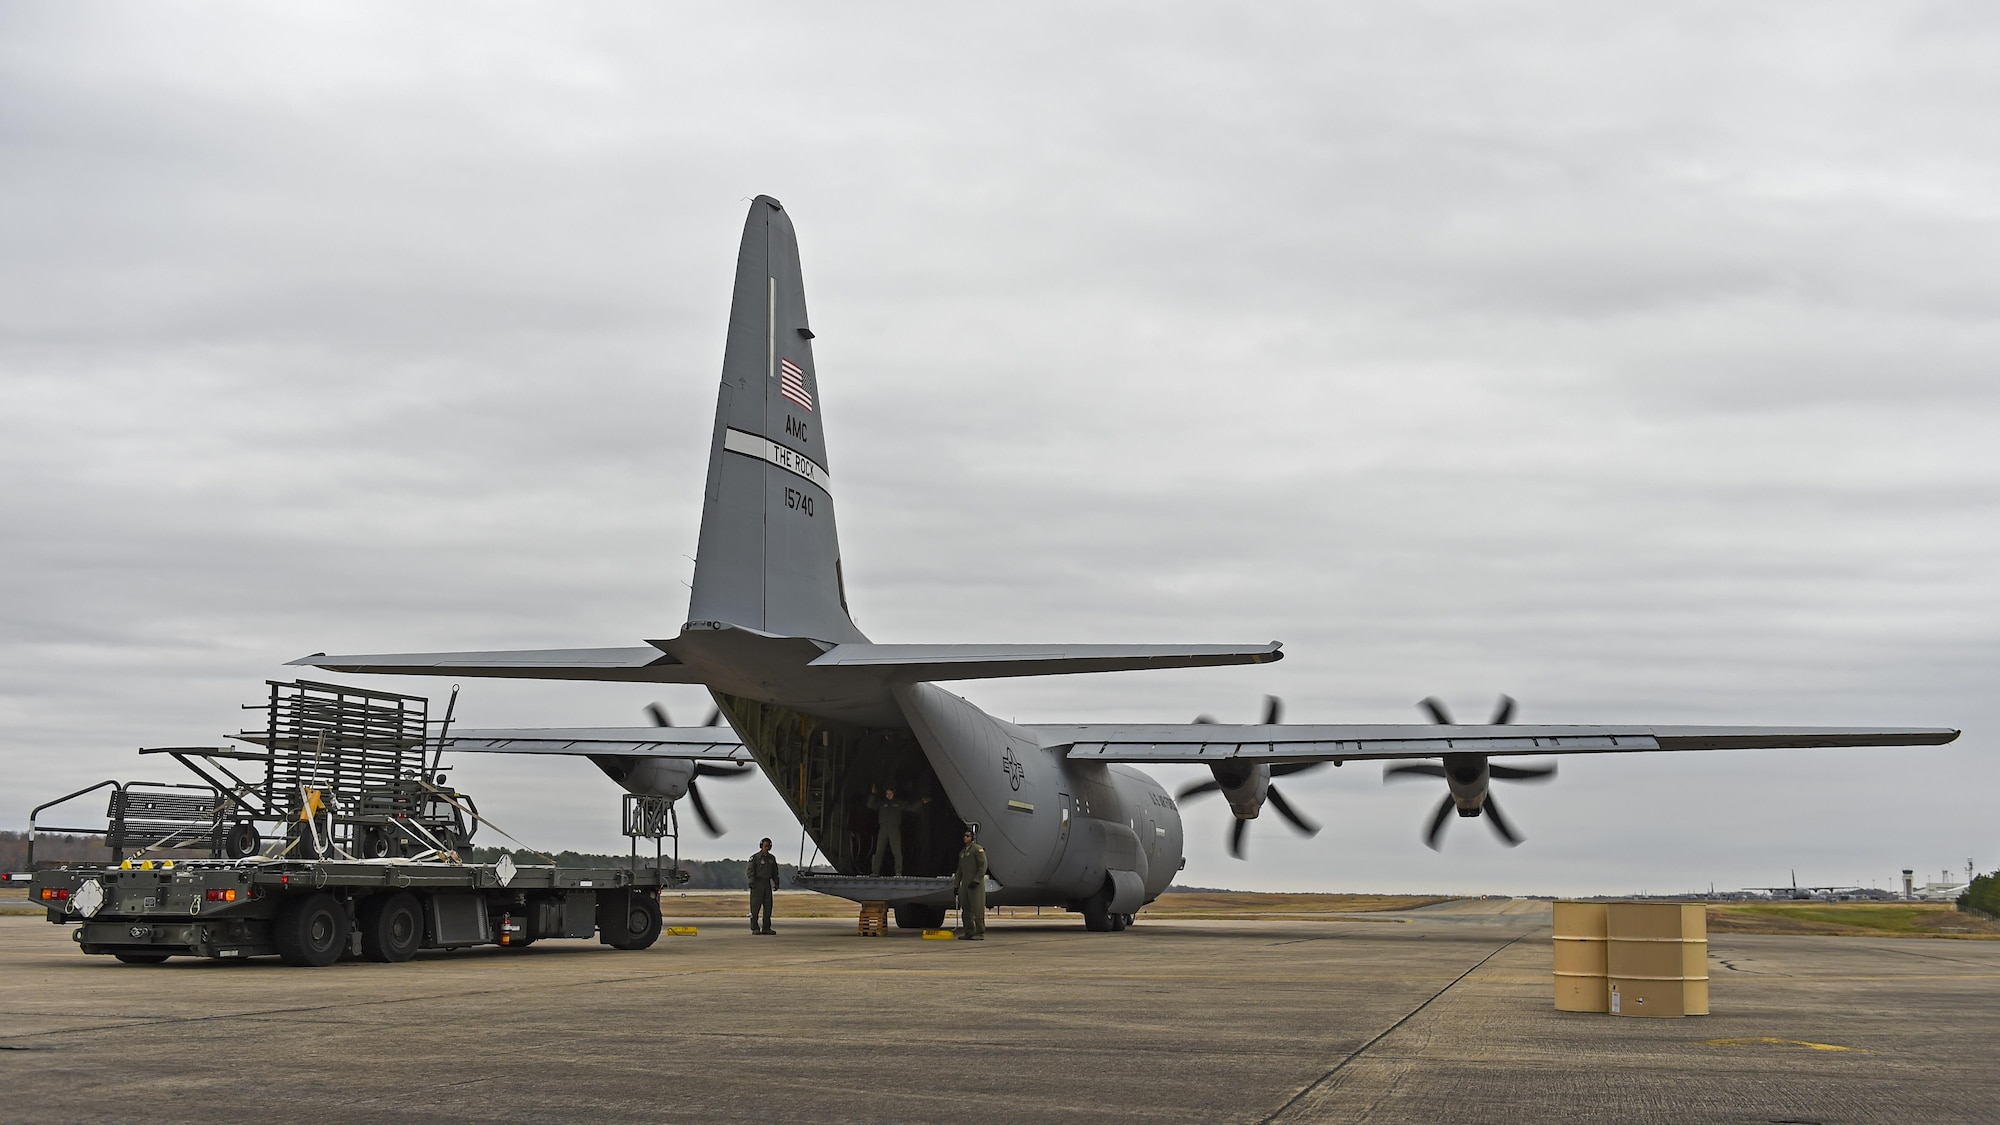 U.S. Air Force C-130J loadmasters from the 61st Airlift Squadron prepare to perform a Combat Offload Method B technique Dec 7, 2016, at Little Rock Air Force Base, Ark. The technique is often used by C-130 aircrews in austere locations to quickly offload supplies. (U.S Air Force photo by Senior Airman Harry Brexel) 